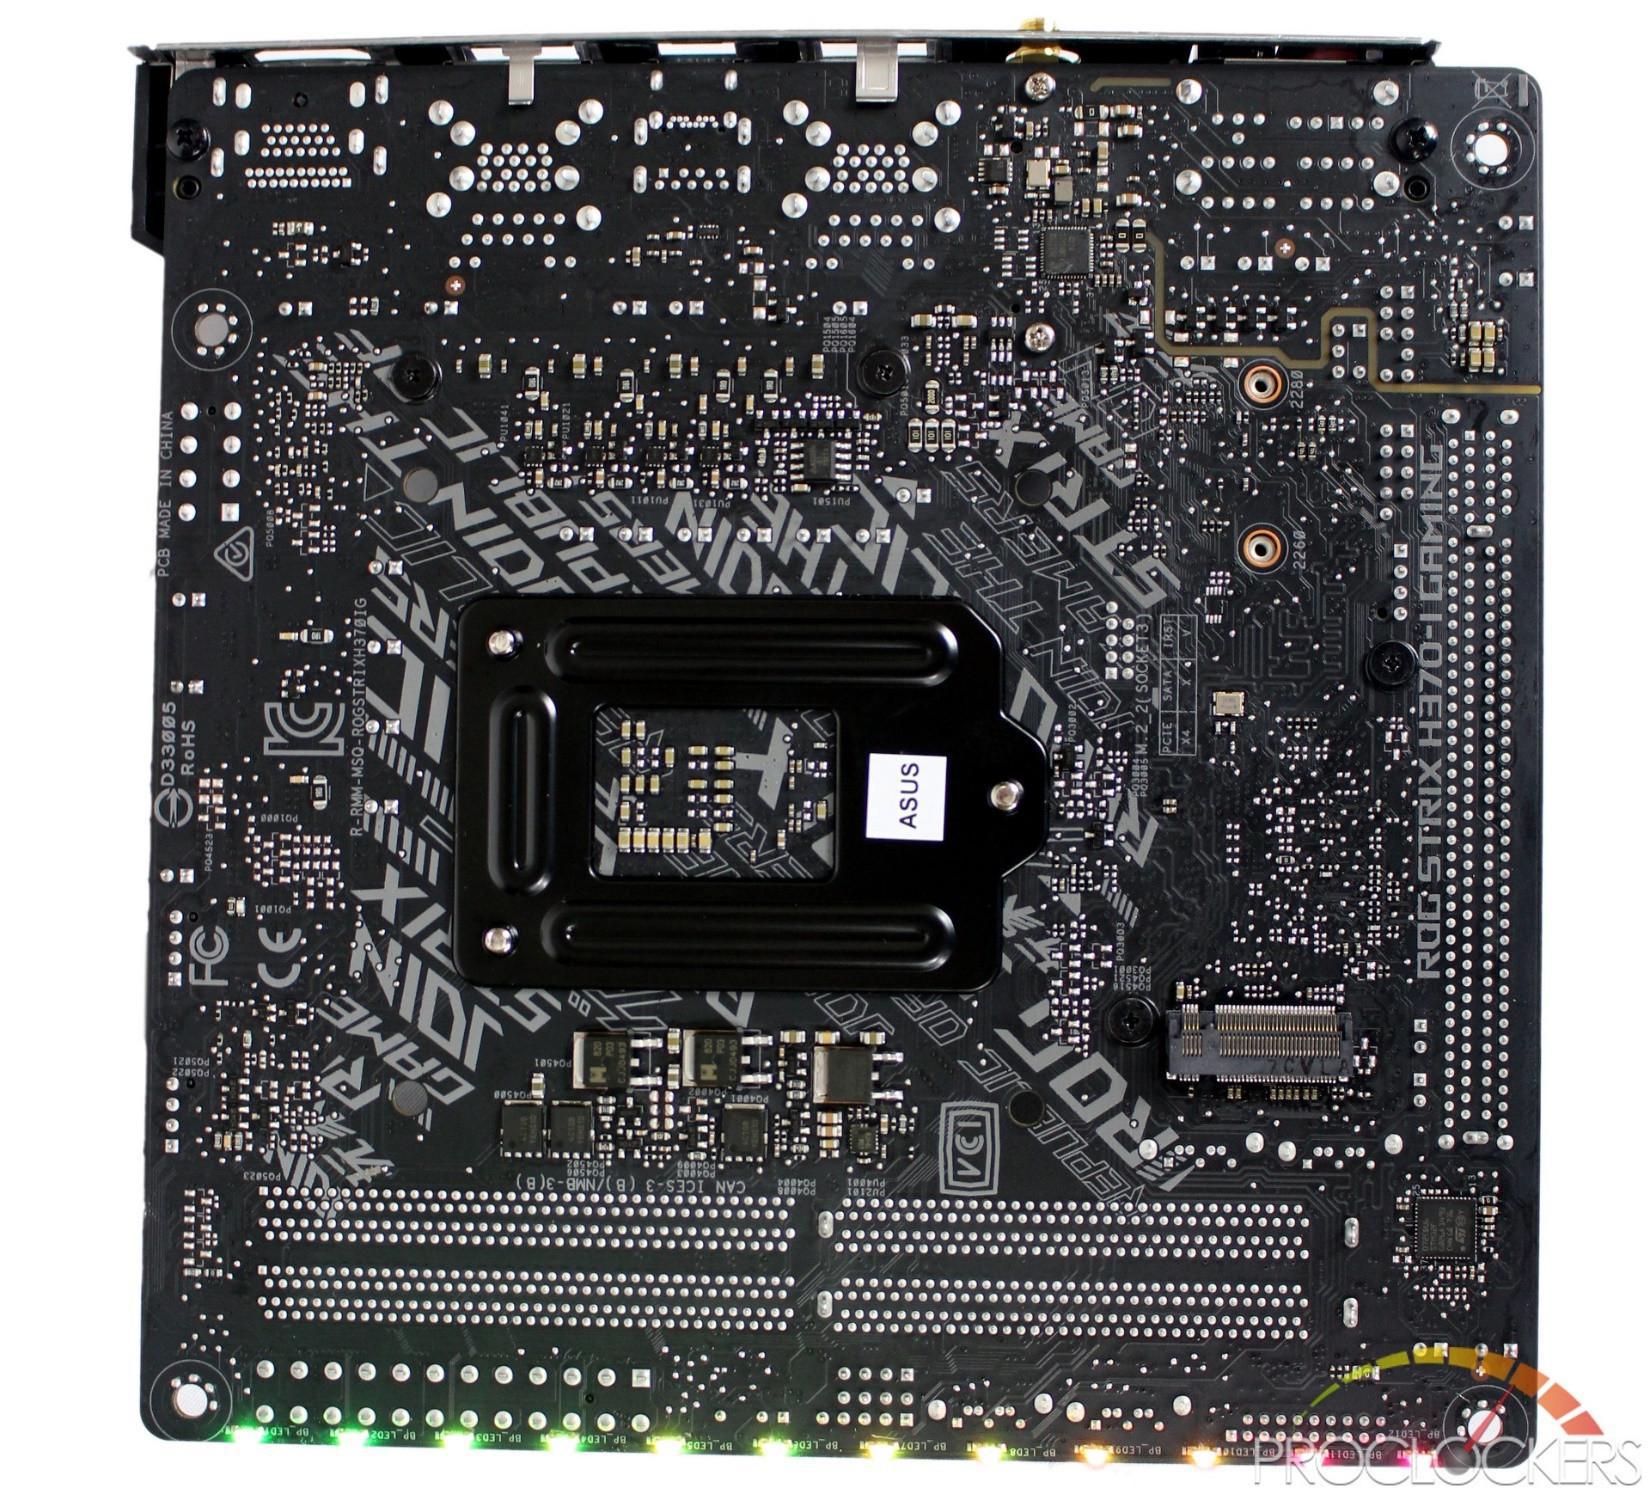 ASUS ROG STRIX H370-I Gaming Motherboard Review | Page 4 of 9 | PROCLOCKERS